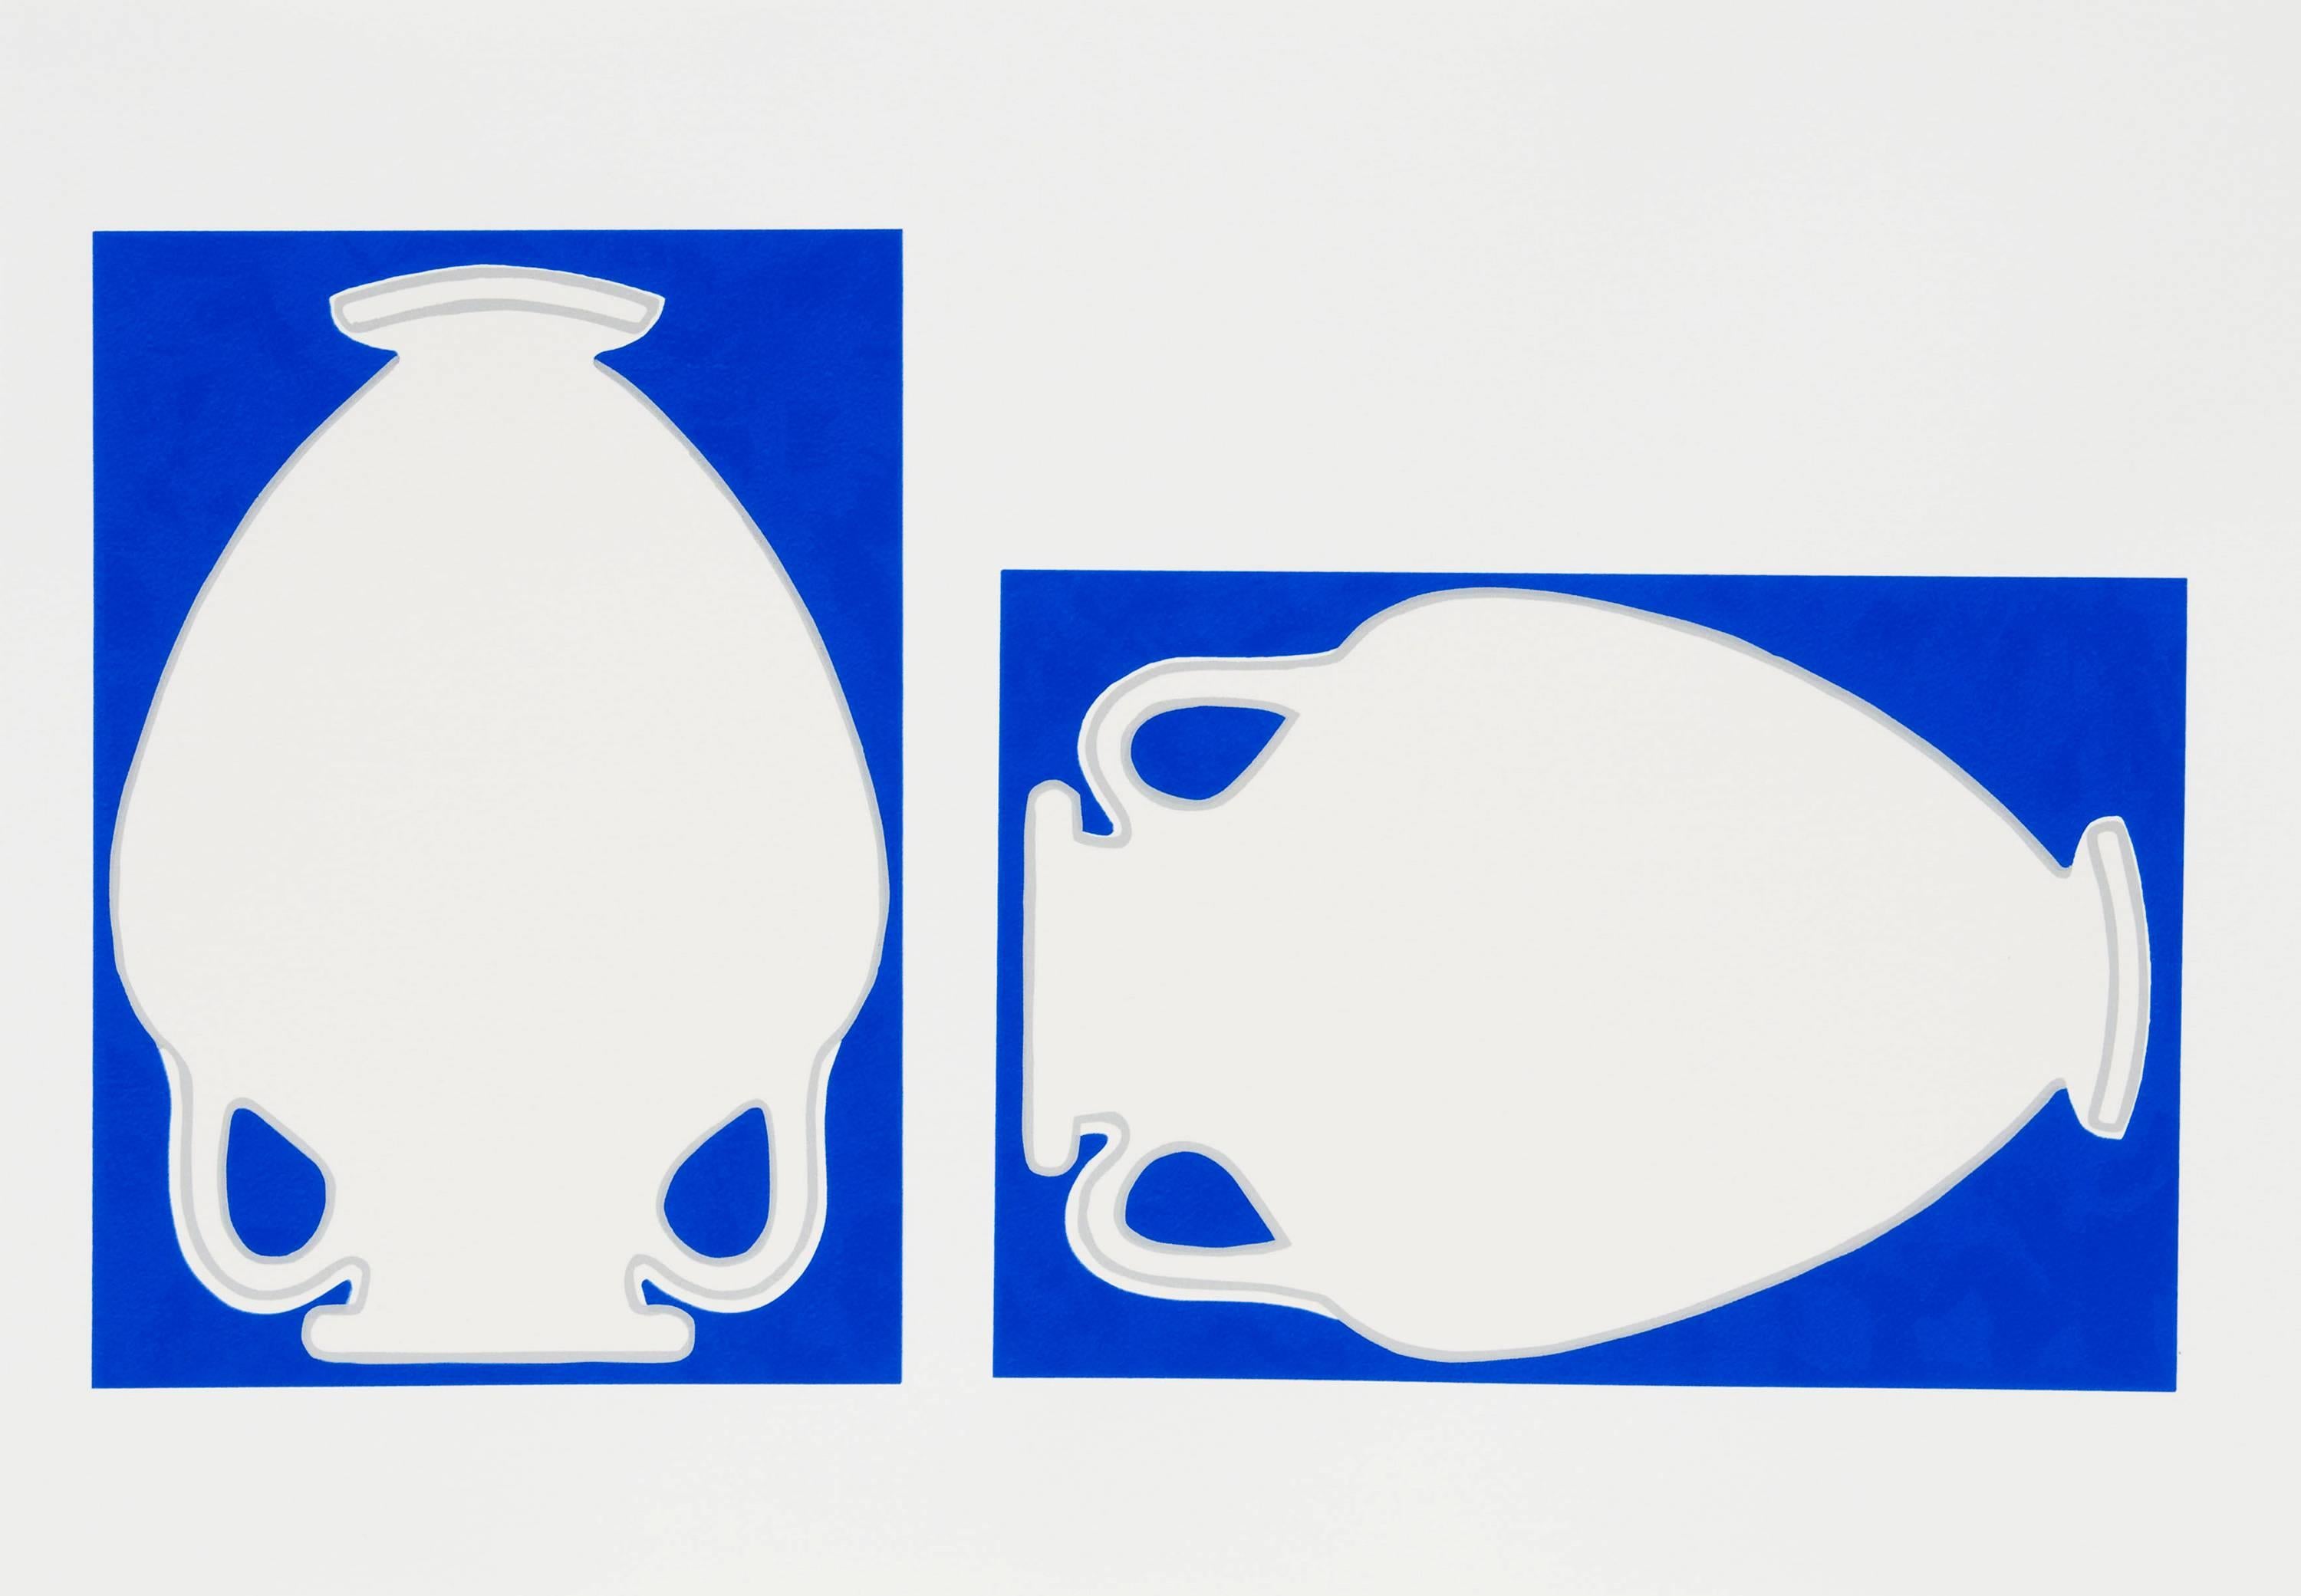 Jo Baer
Amphora Frieze, 2004 
Suite of seven color screenprints
16 x 22 1/2 in. (40.6 x 57.2 cm)
Edition of 30

This work, Amphora Frieze, consists of seven prints all together, each in excellent condition and was co-published by Brooke